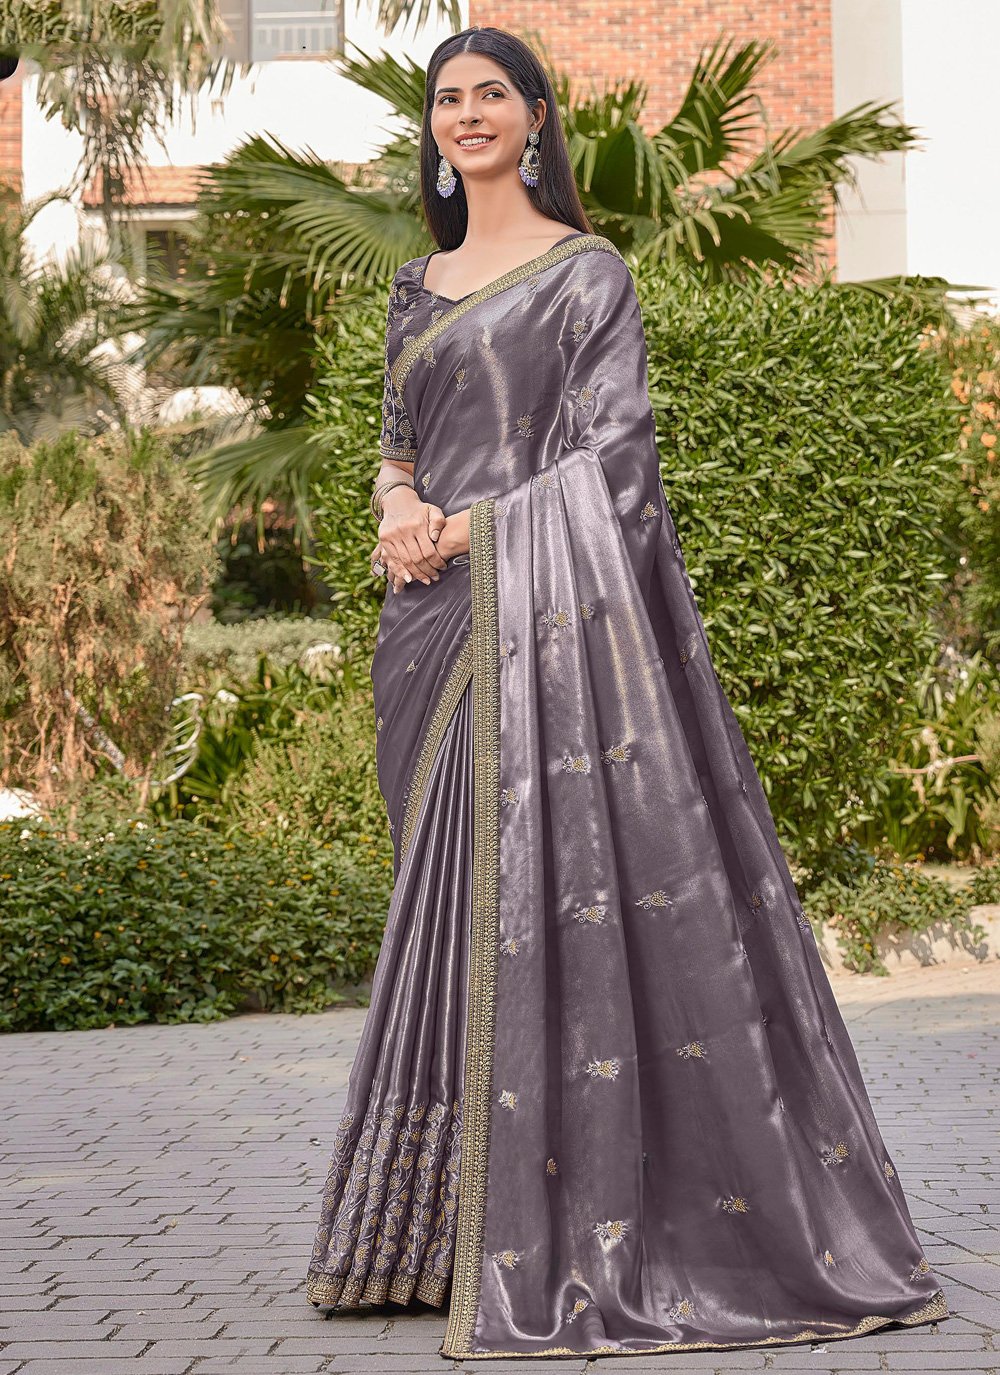 Long Gown Design Images Indian | Wide Border Gown with Dupatta